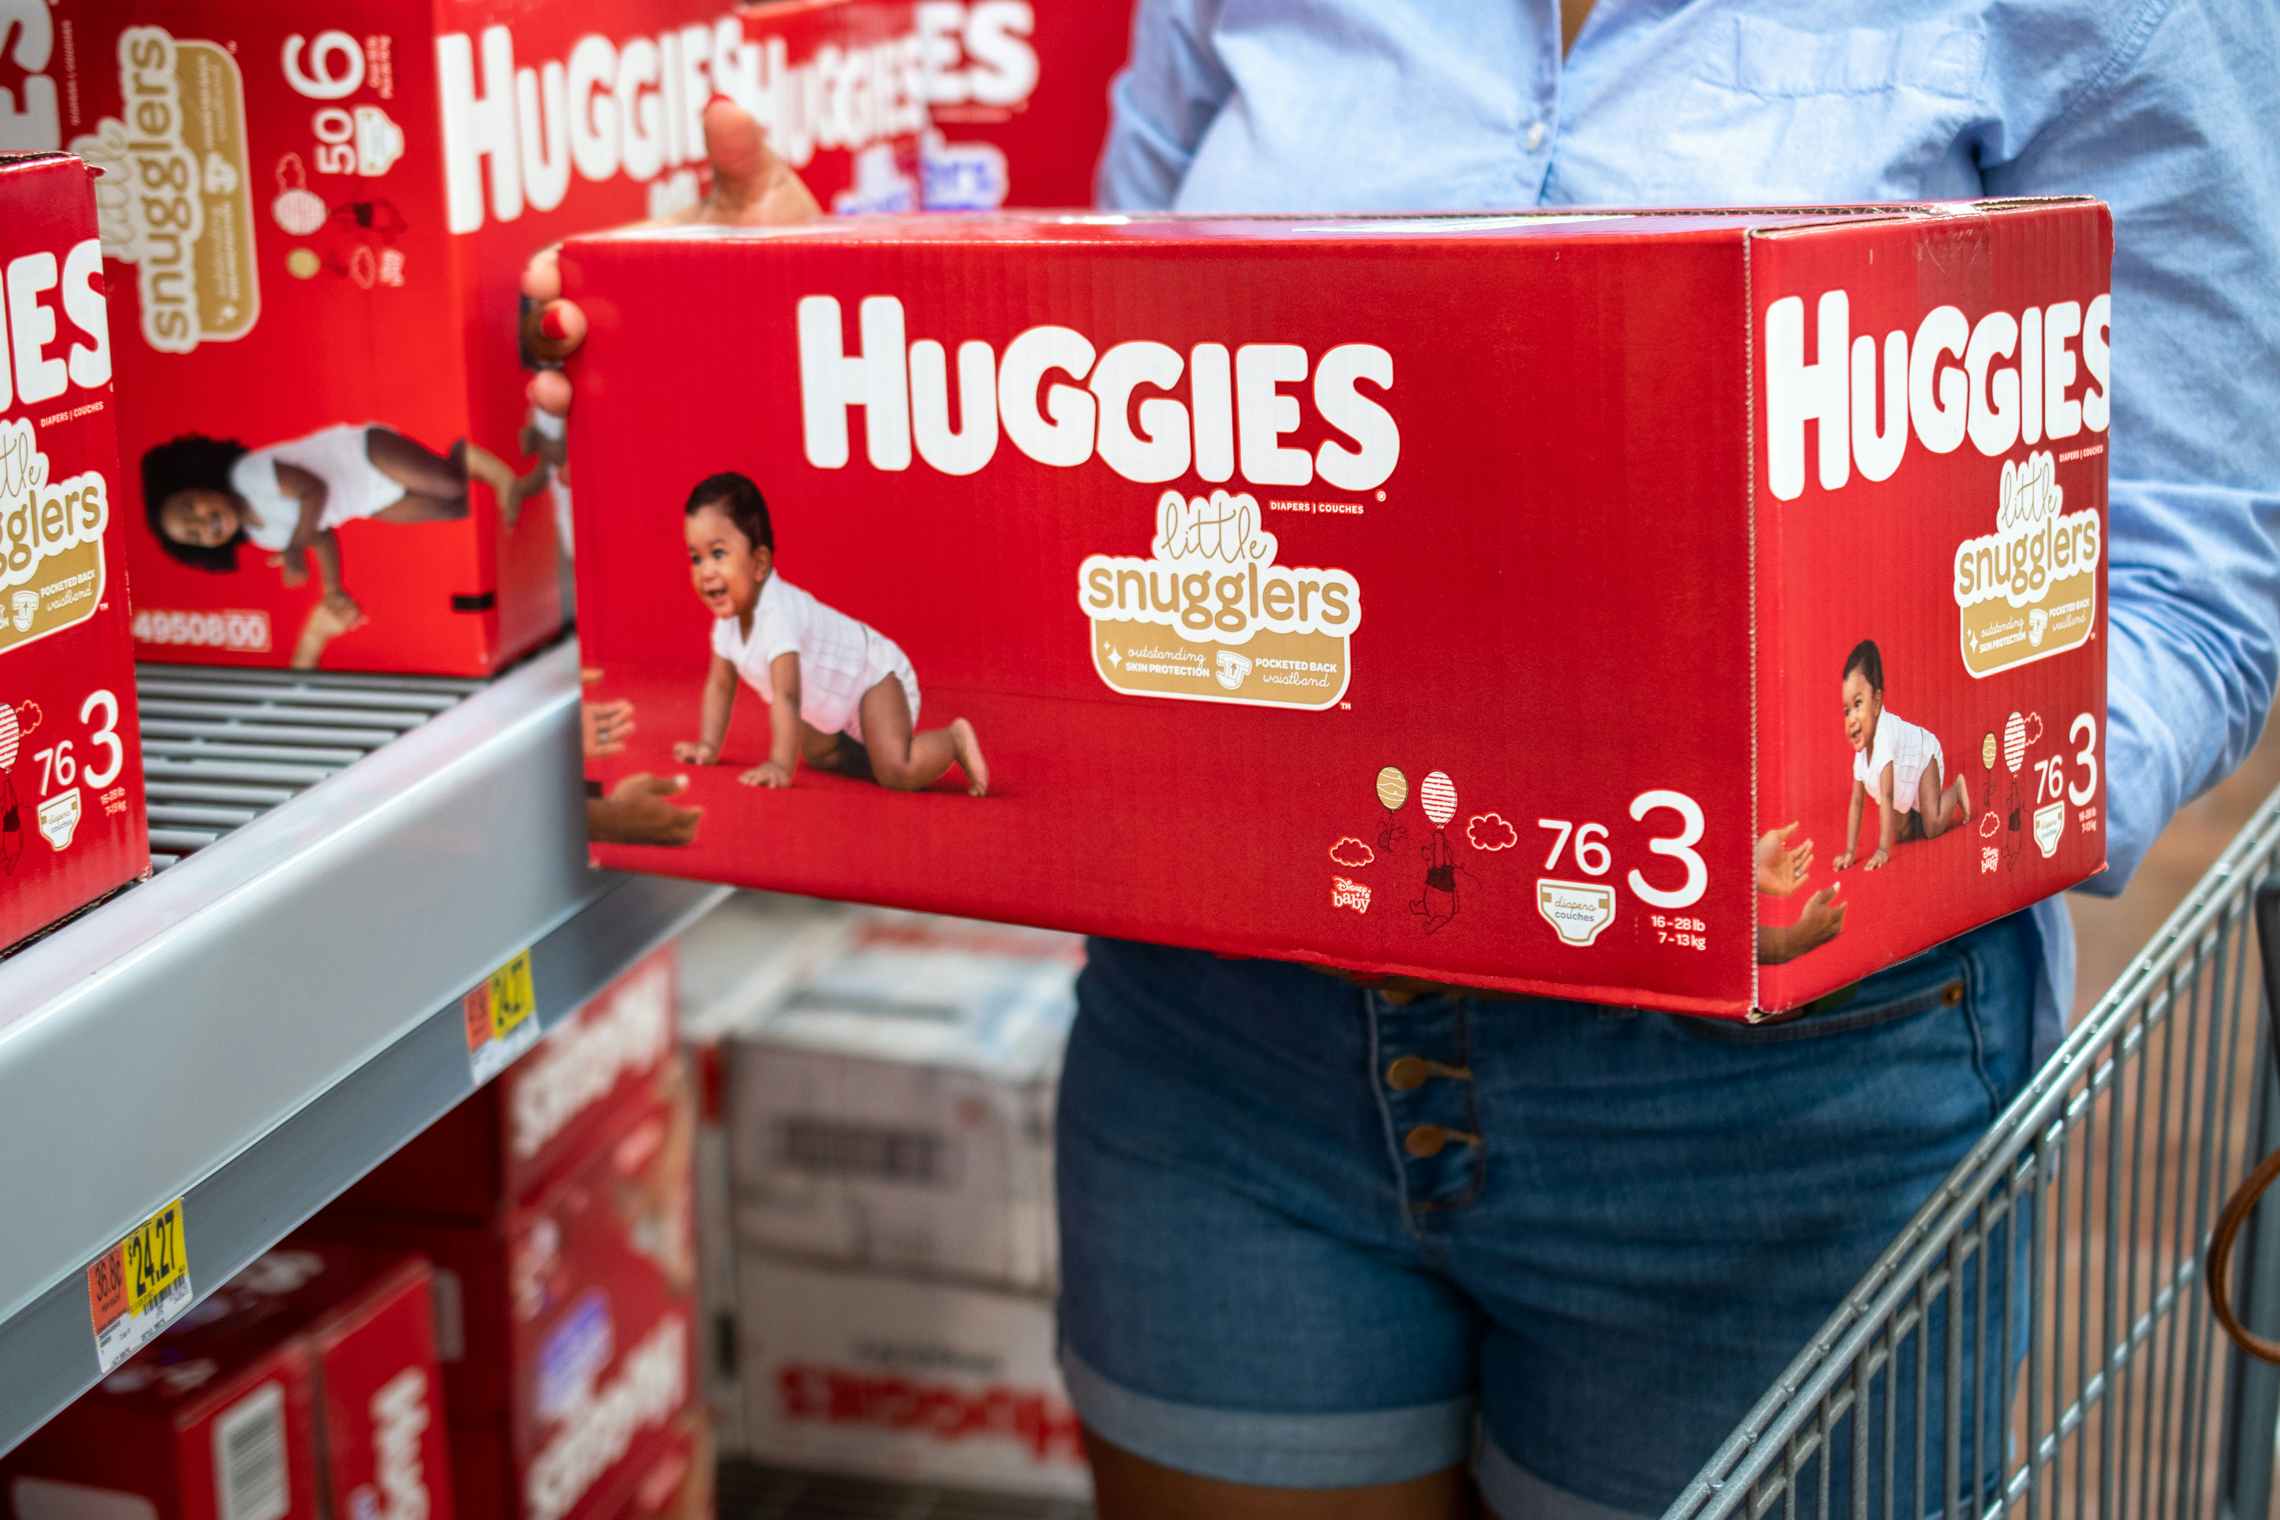 A woman holding a box of Huggies Diapers.